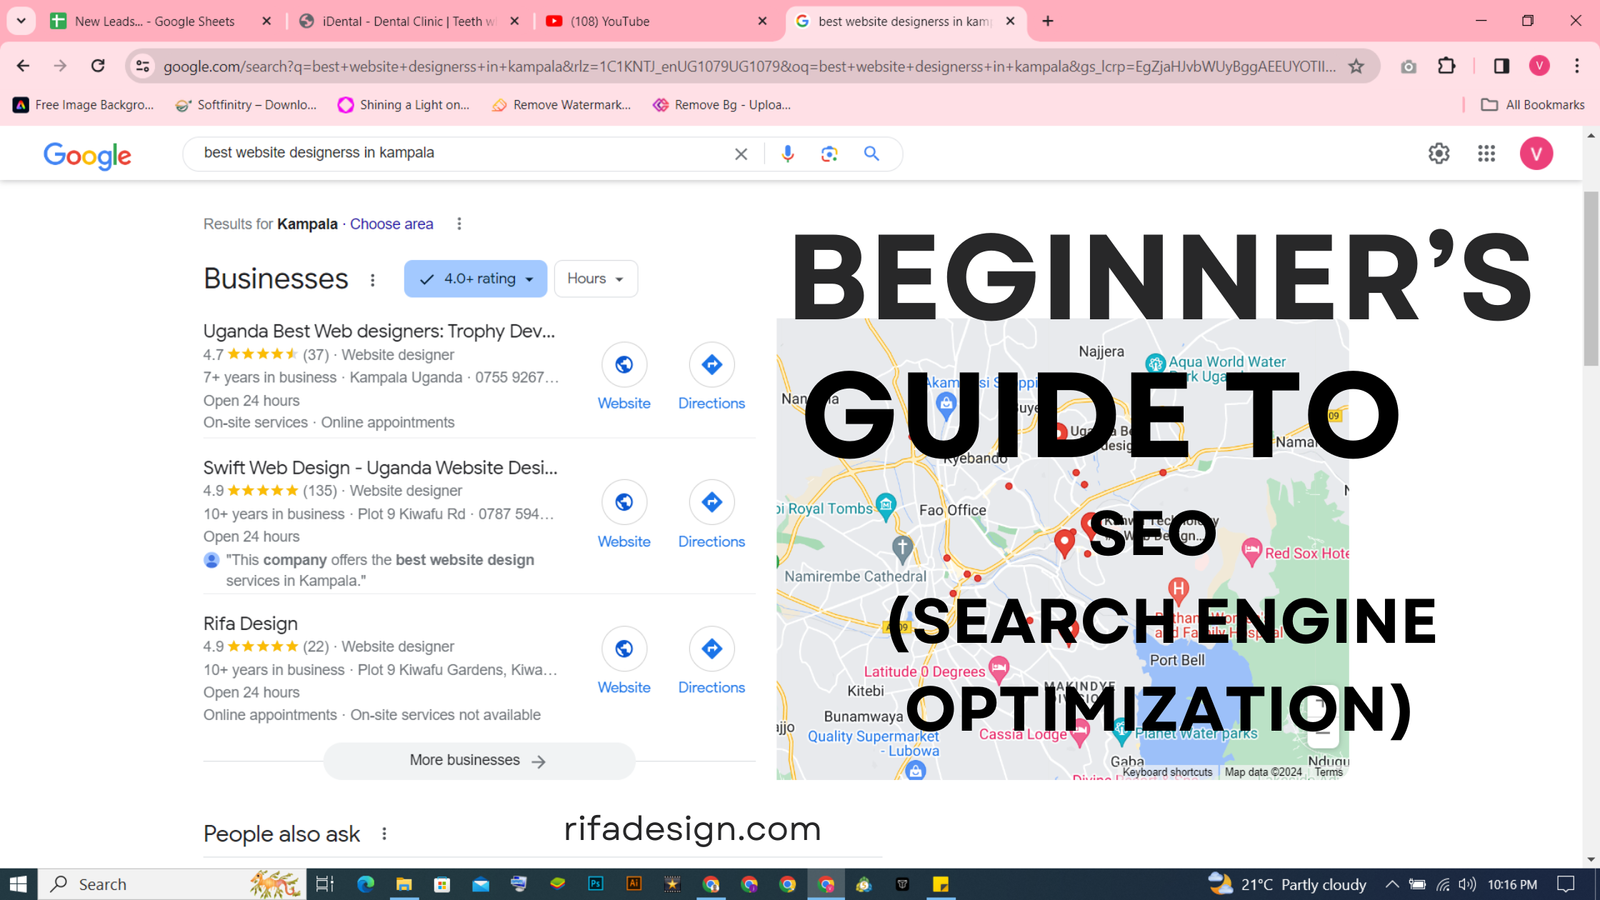 SEO: Beginner’s Guide to SEO (Search Engine Optimization)